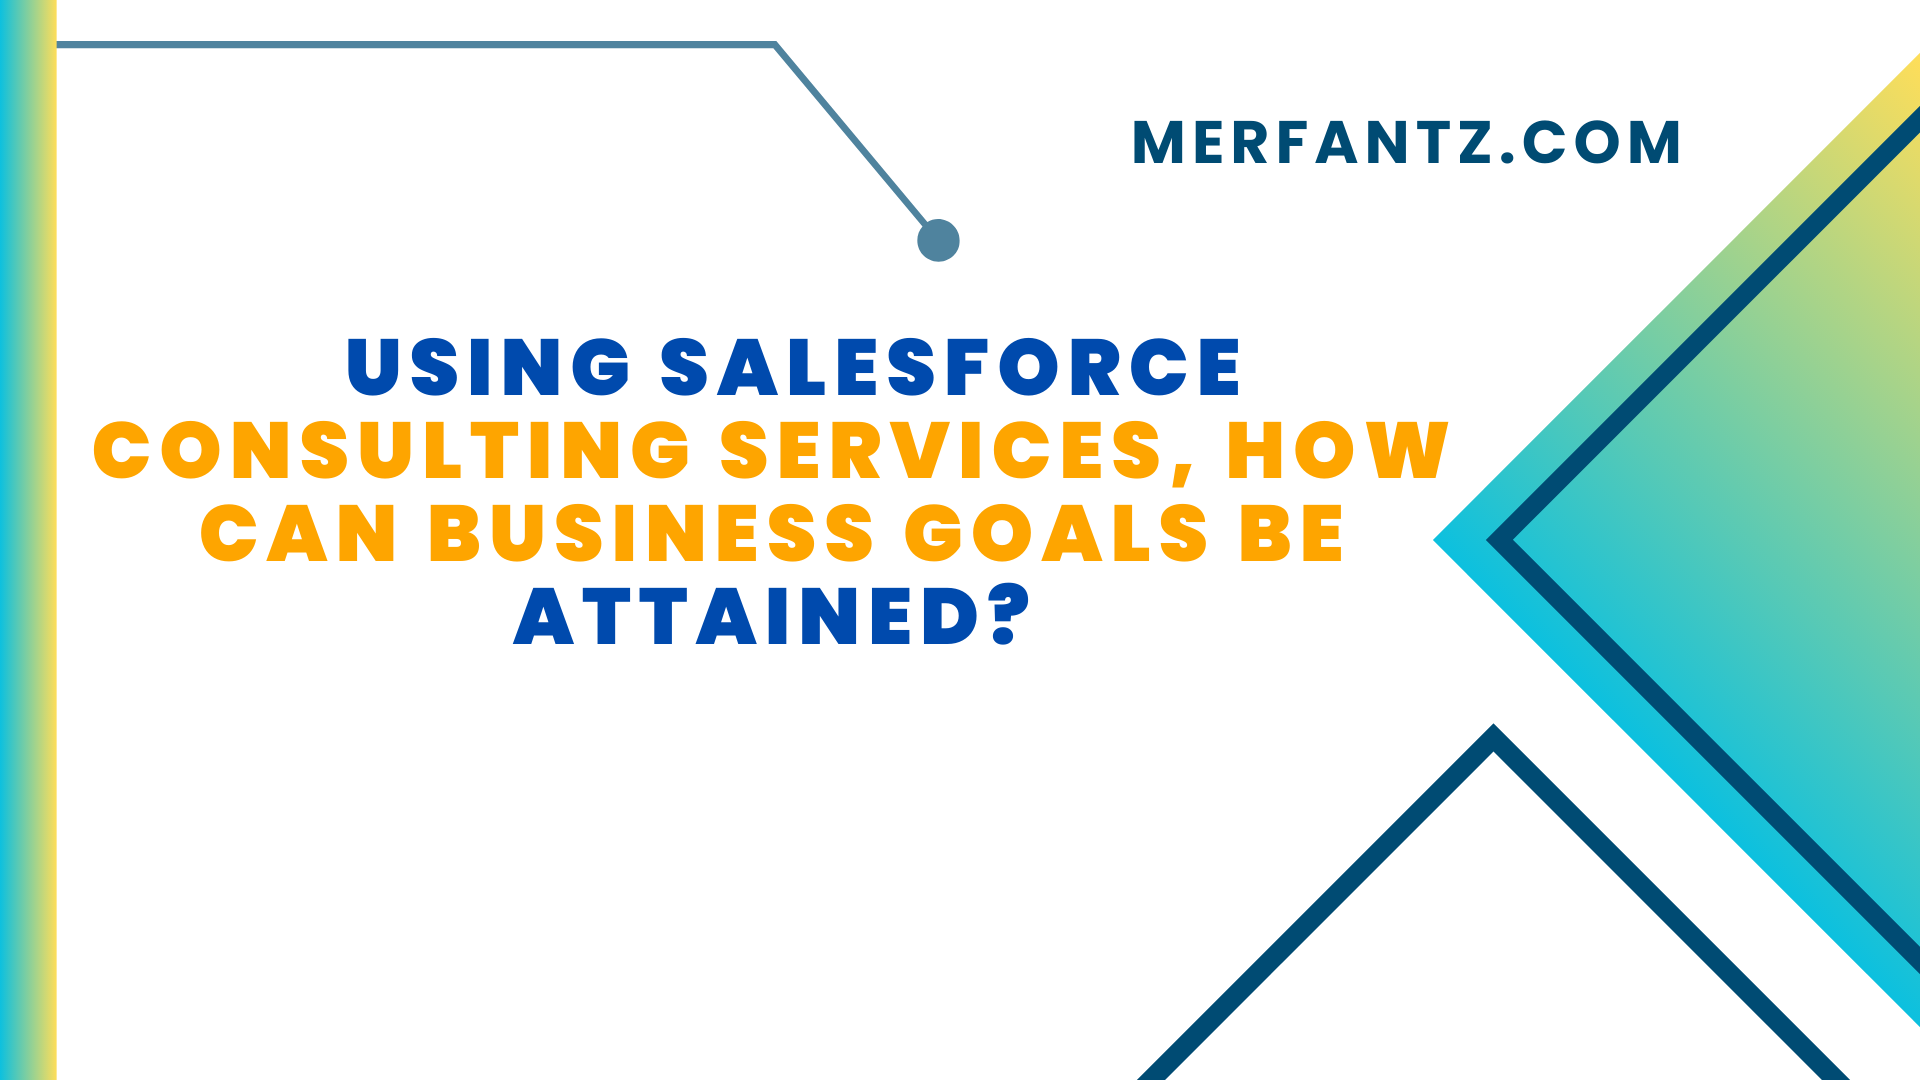 Using Salesforce Consulting Services, how can business goals be attained